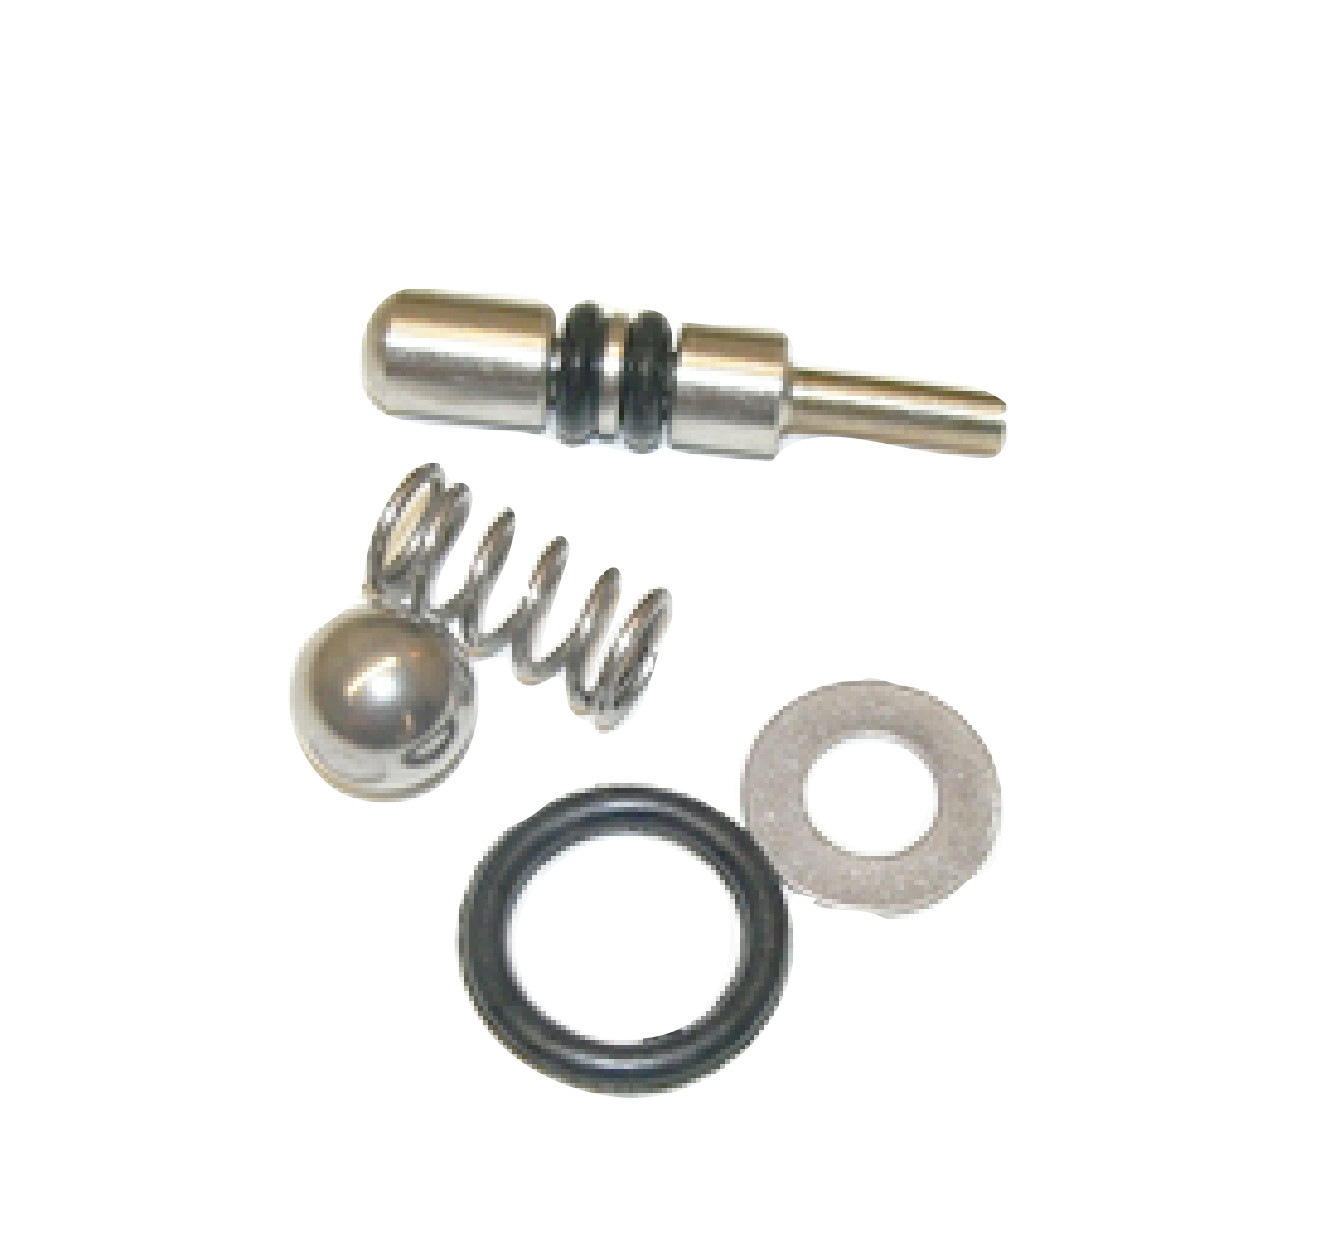 WestPak USA Soft Touch Angle Valve Repair Kit | AW794